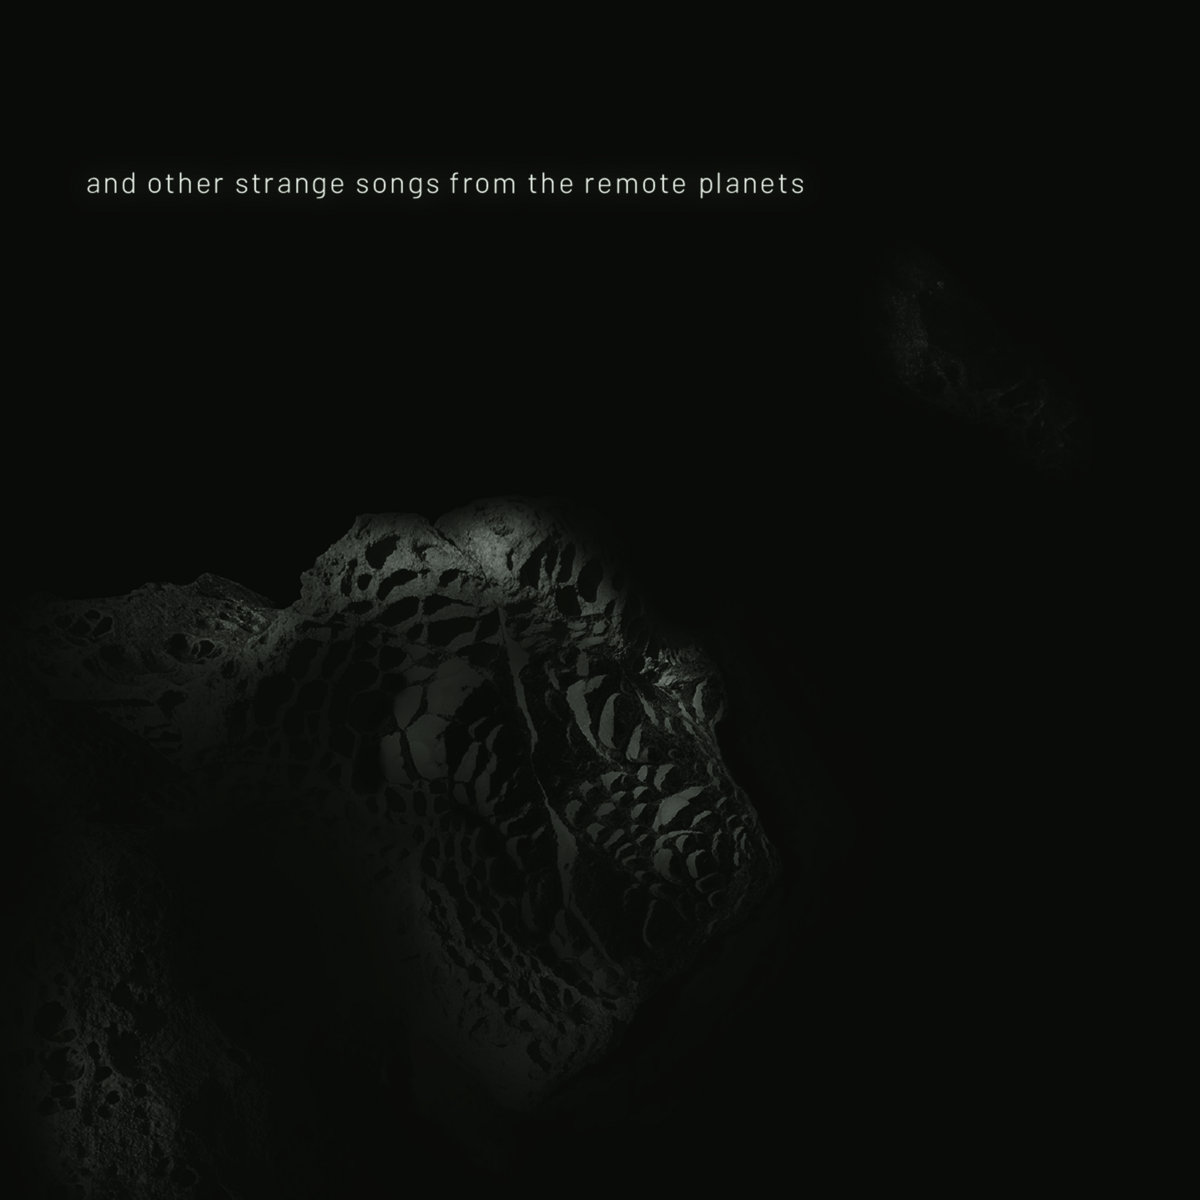 Döring: And other strange songs from the remote planets